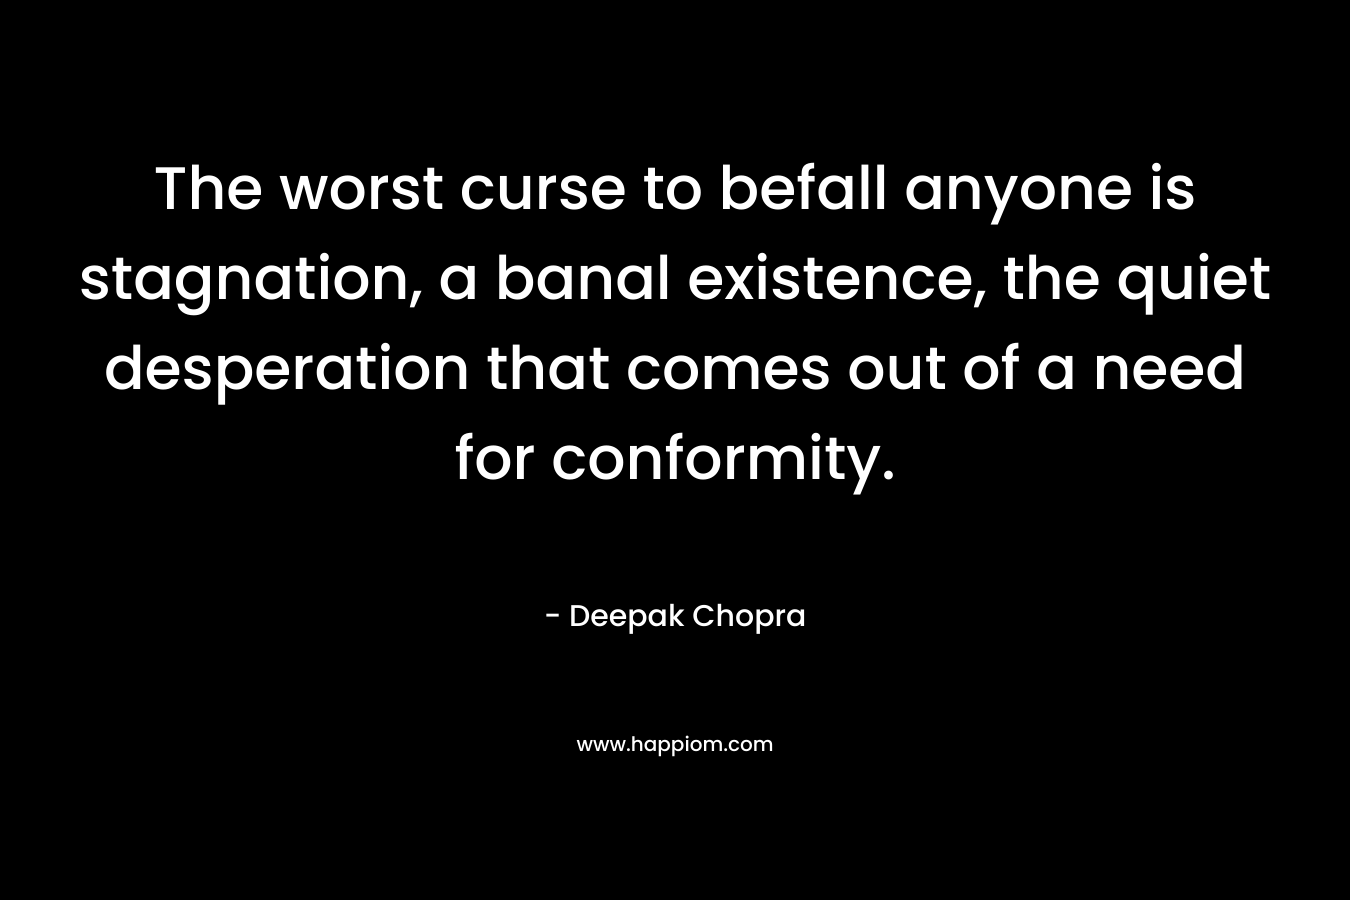 The worst curse to befall anyone is stagnation, a banal existence, the quiet desperation that comes out of a need for conformity. 